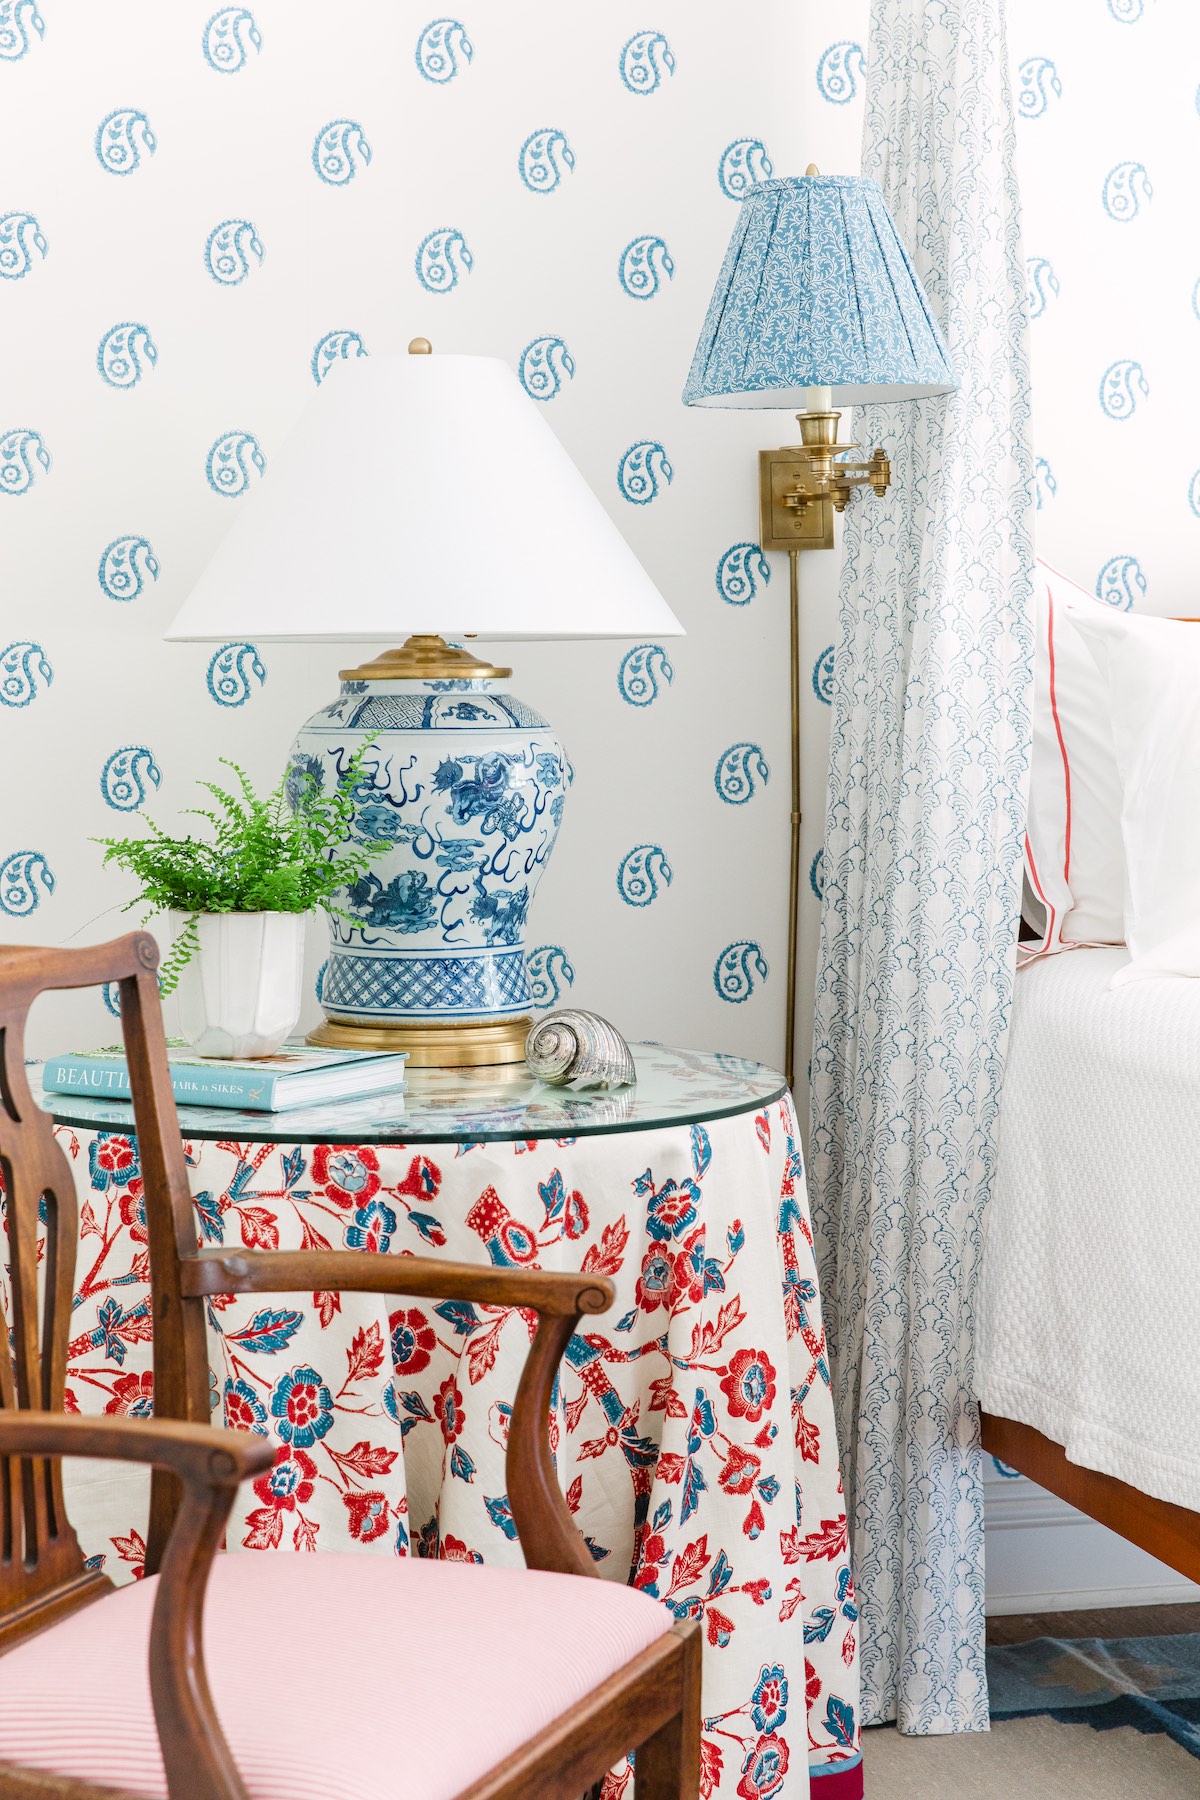 Bedside table with floral print table cloth, blue and white jar lamp and potted fern. Brass swing-arm lamp with pleated blue and white shade mounted on wall beside bed.